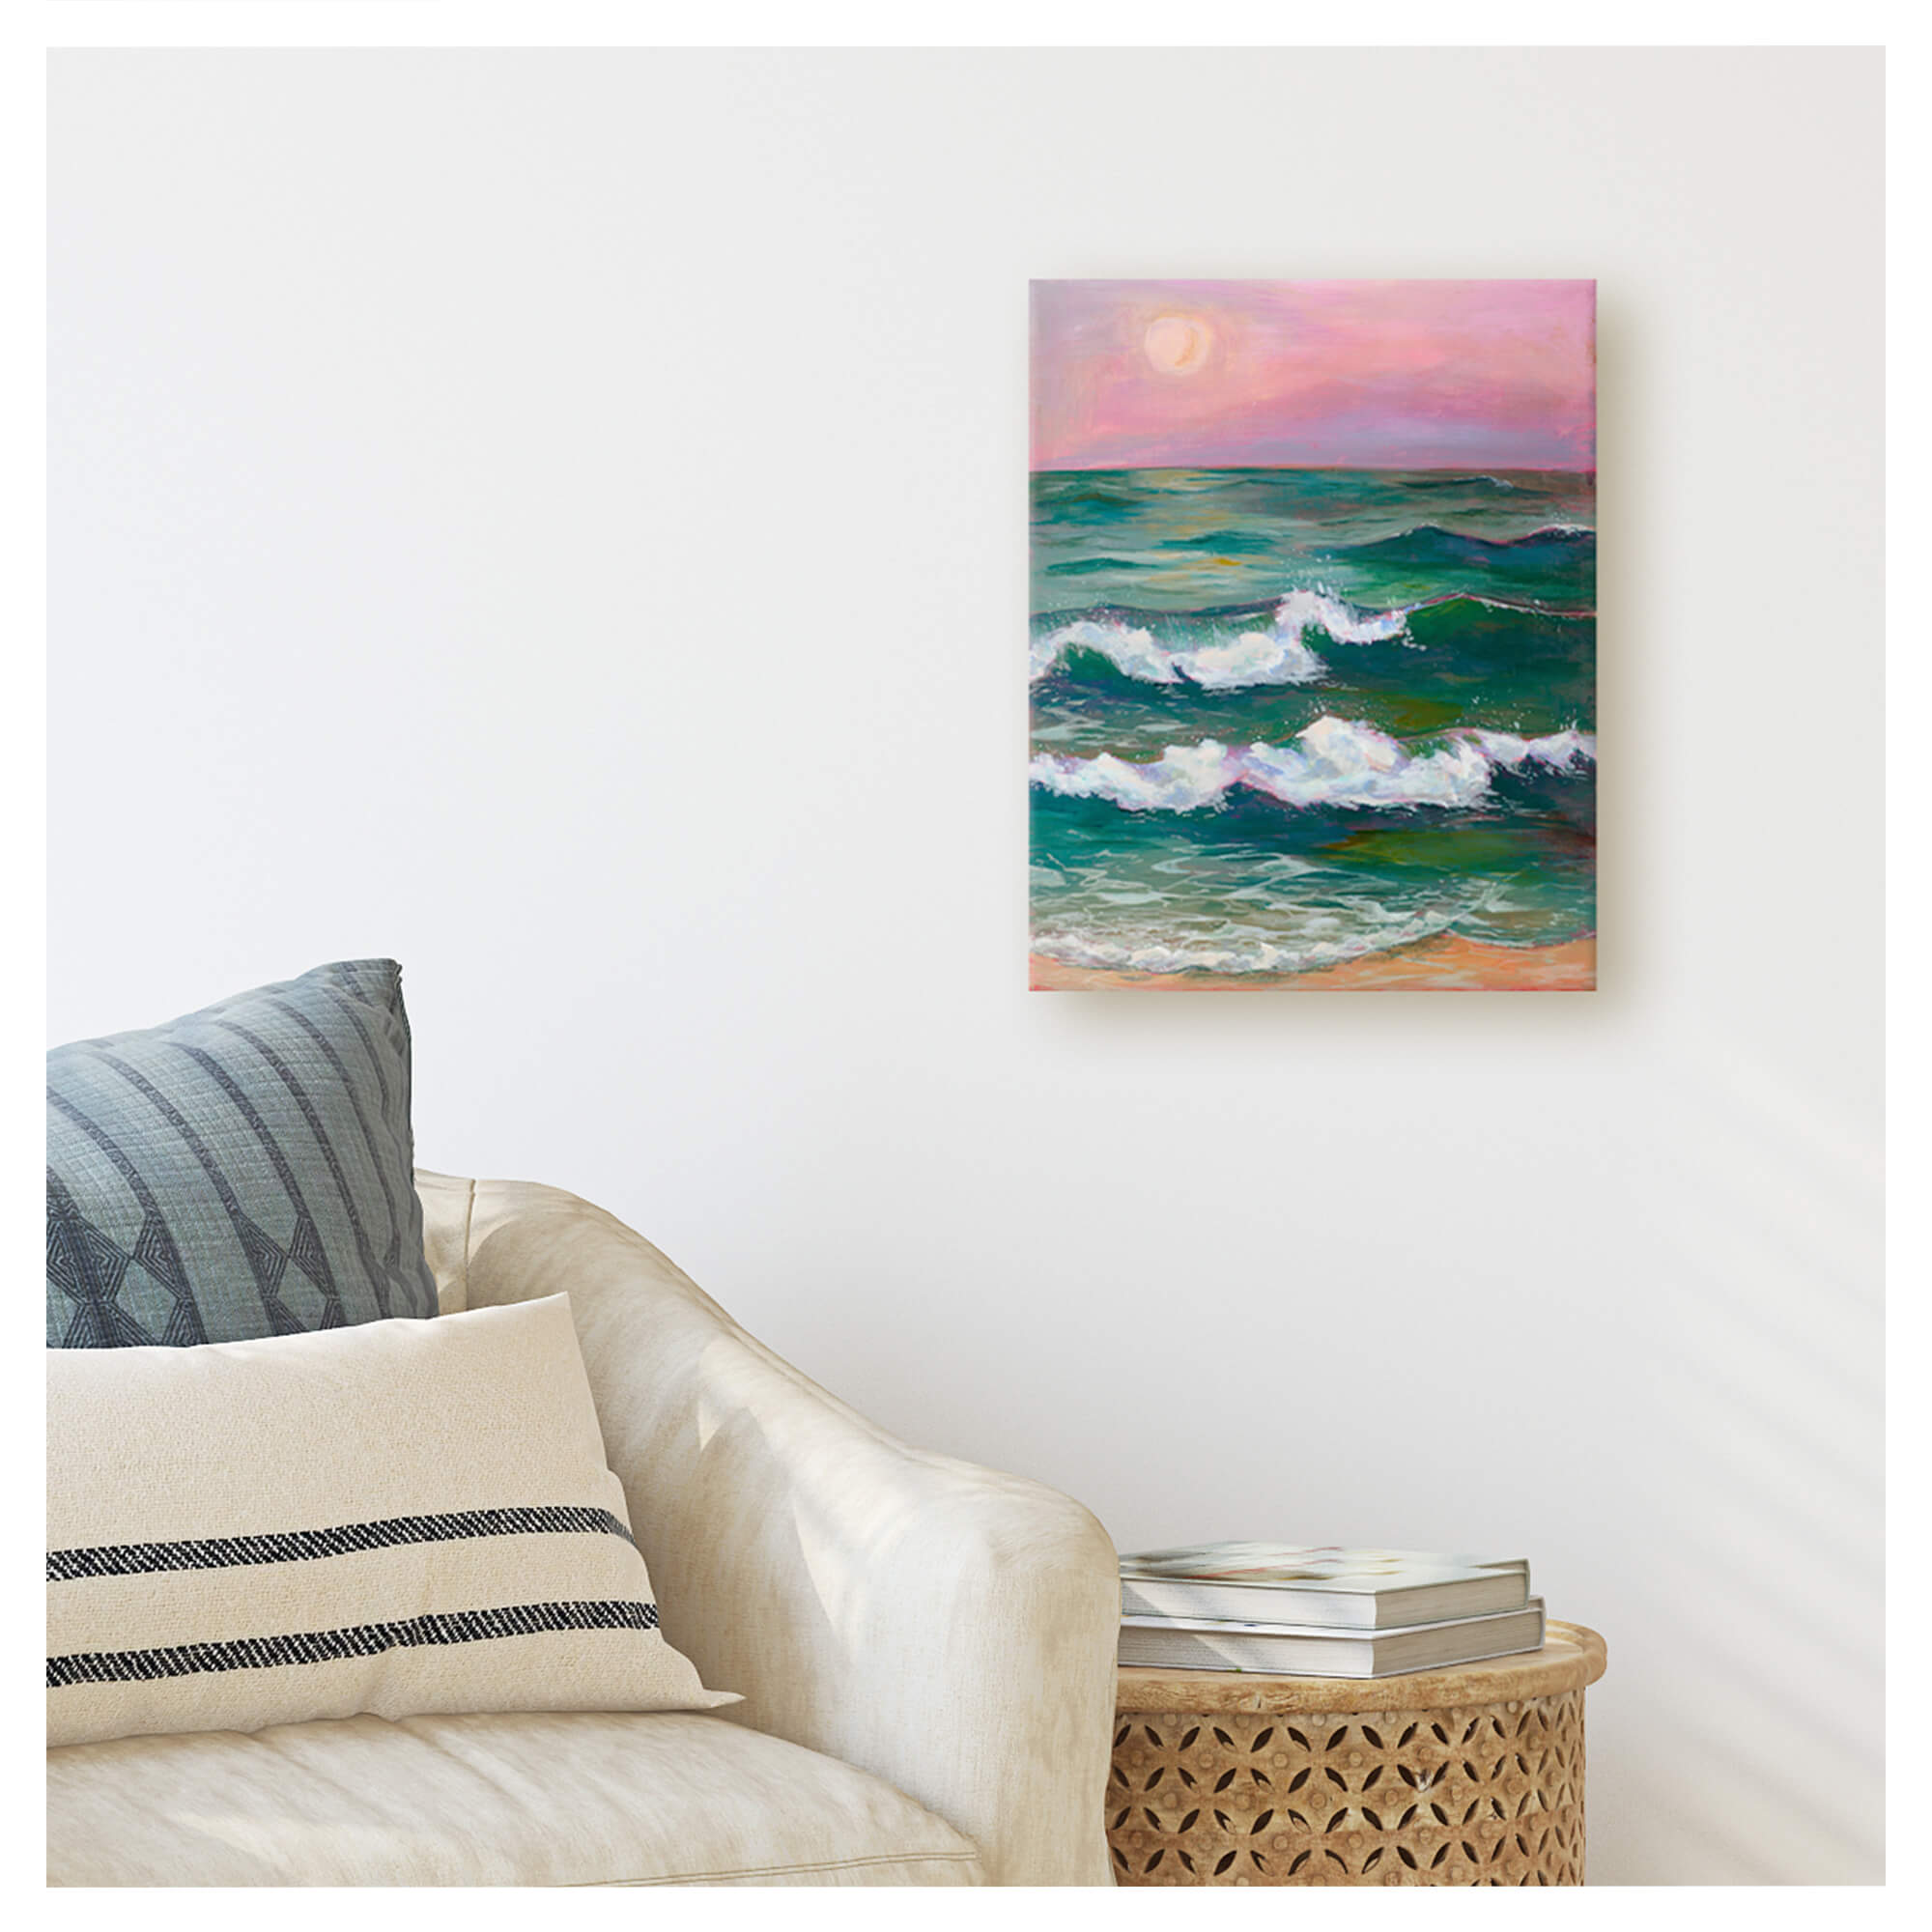 A painting on canvas depicting a vibrant colored seascape by Hawaii artist Lindsay Wilkins